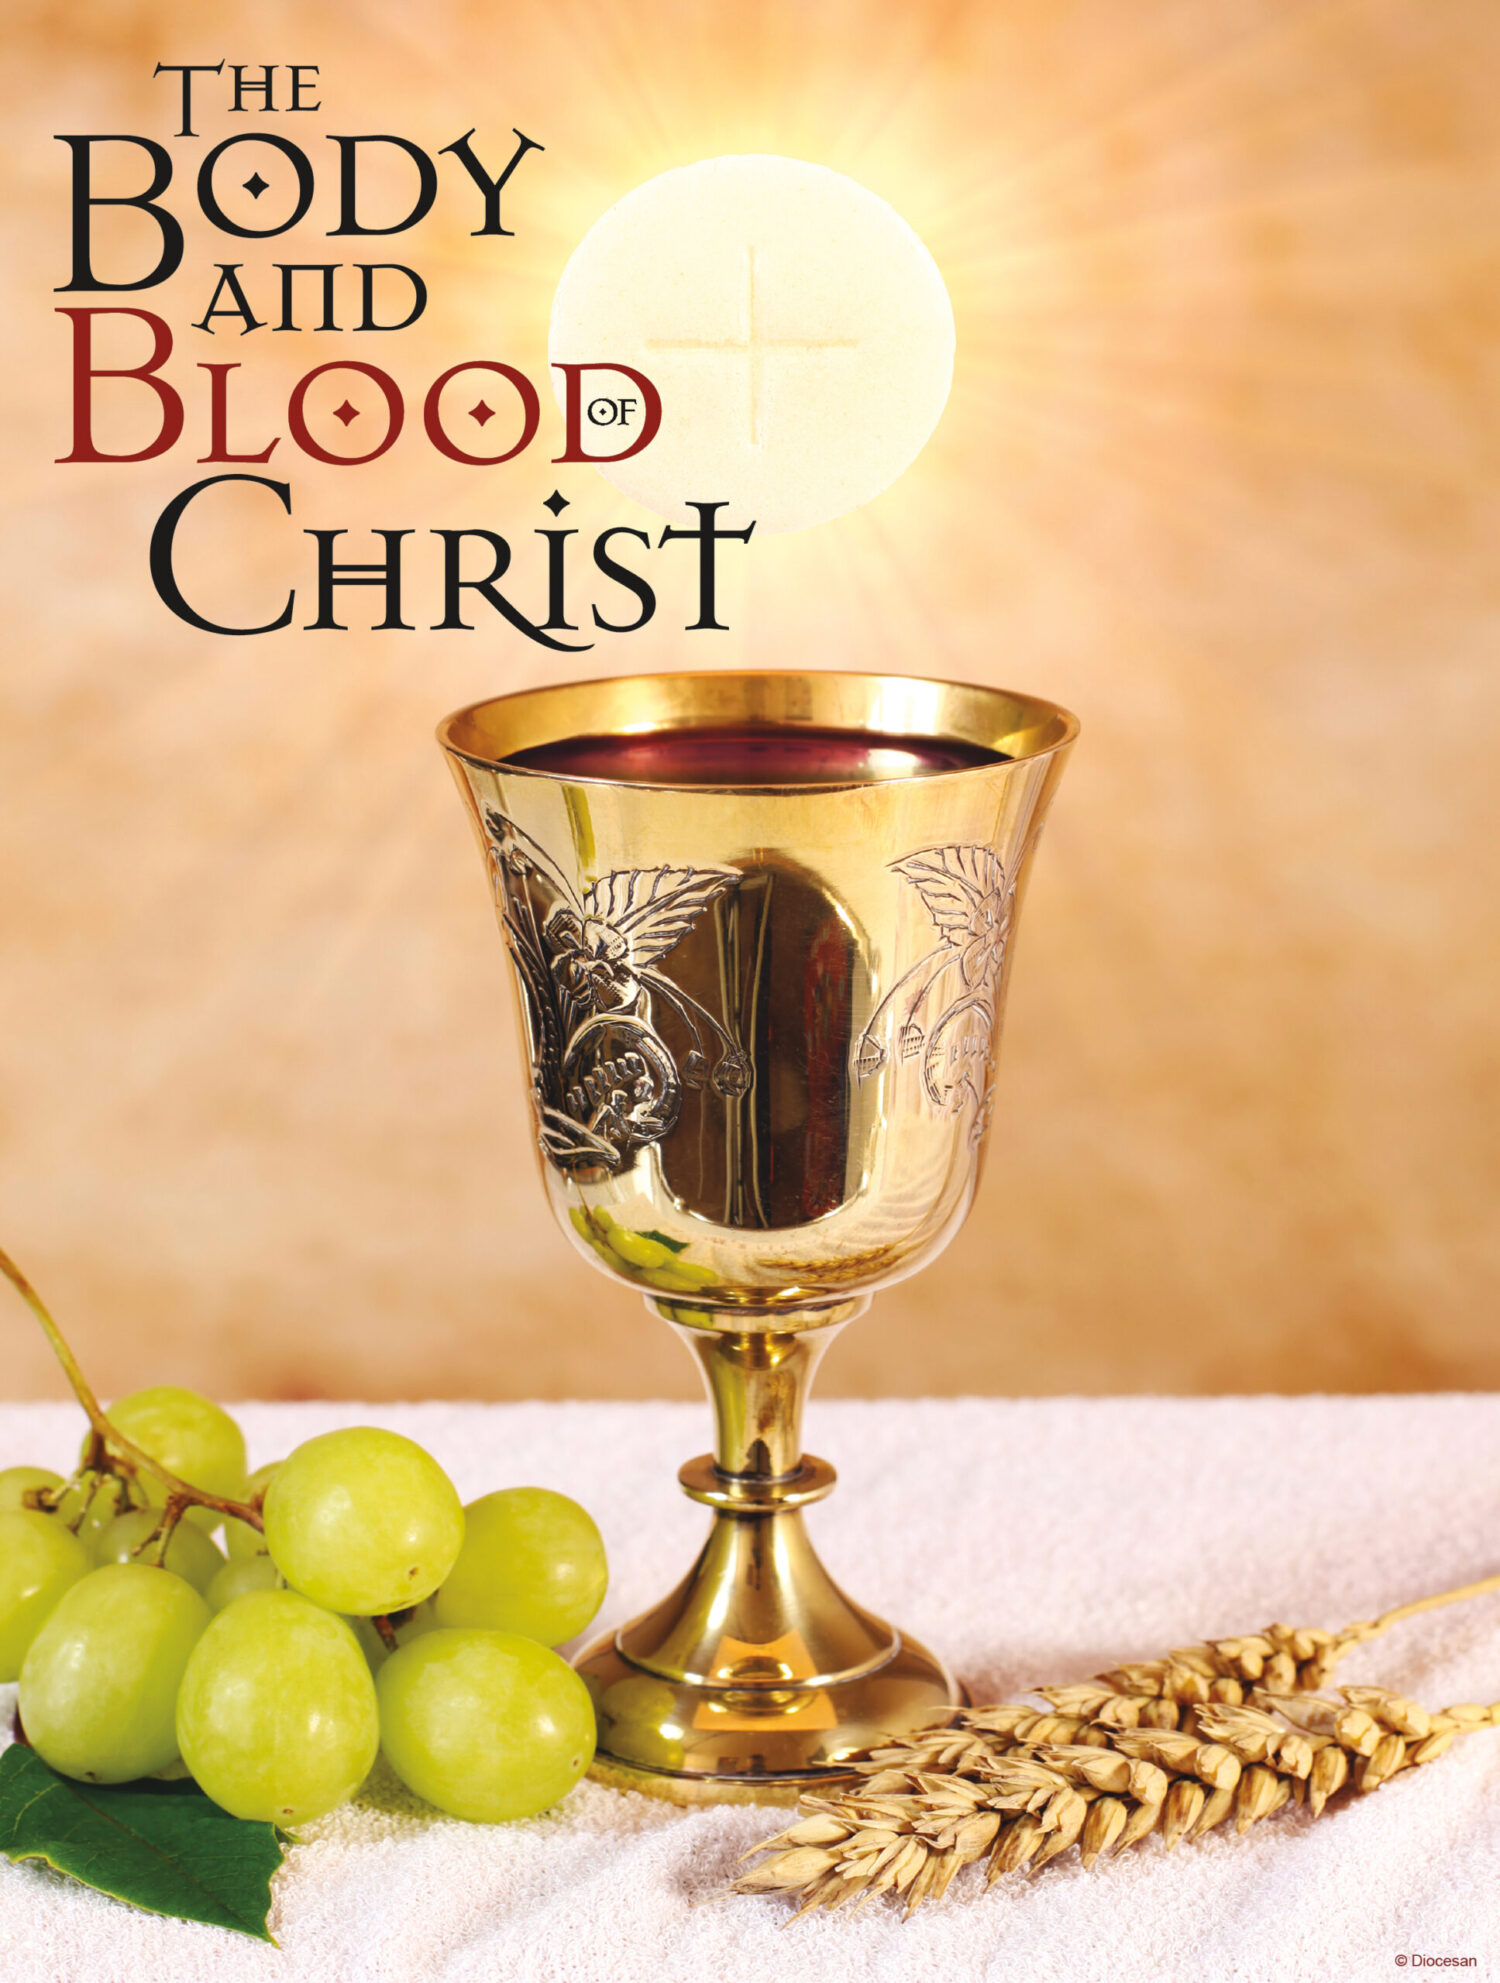 The Most Holy Body and Blood of Christ